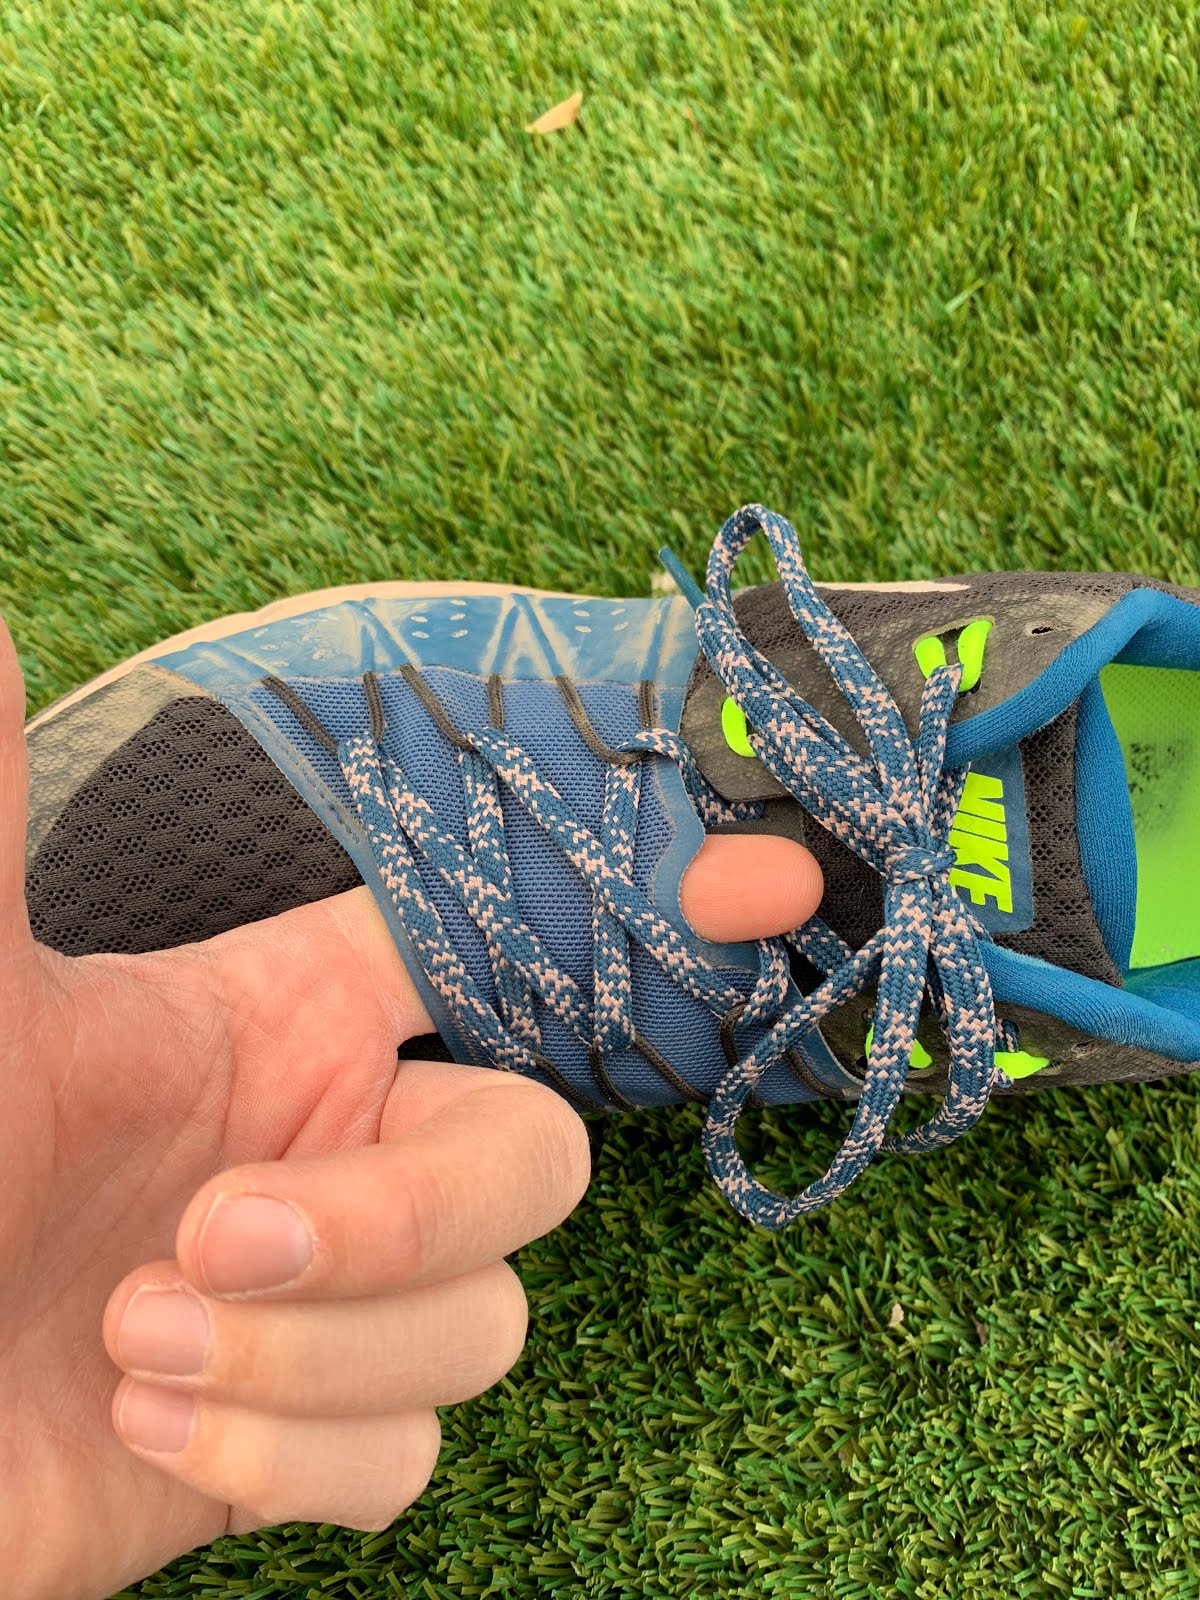 Trail Run: Nike Air Zoom Wildhorse 4 Review - Monster on the in the mud